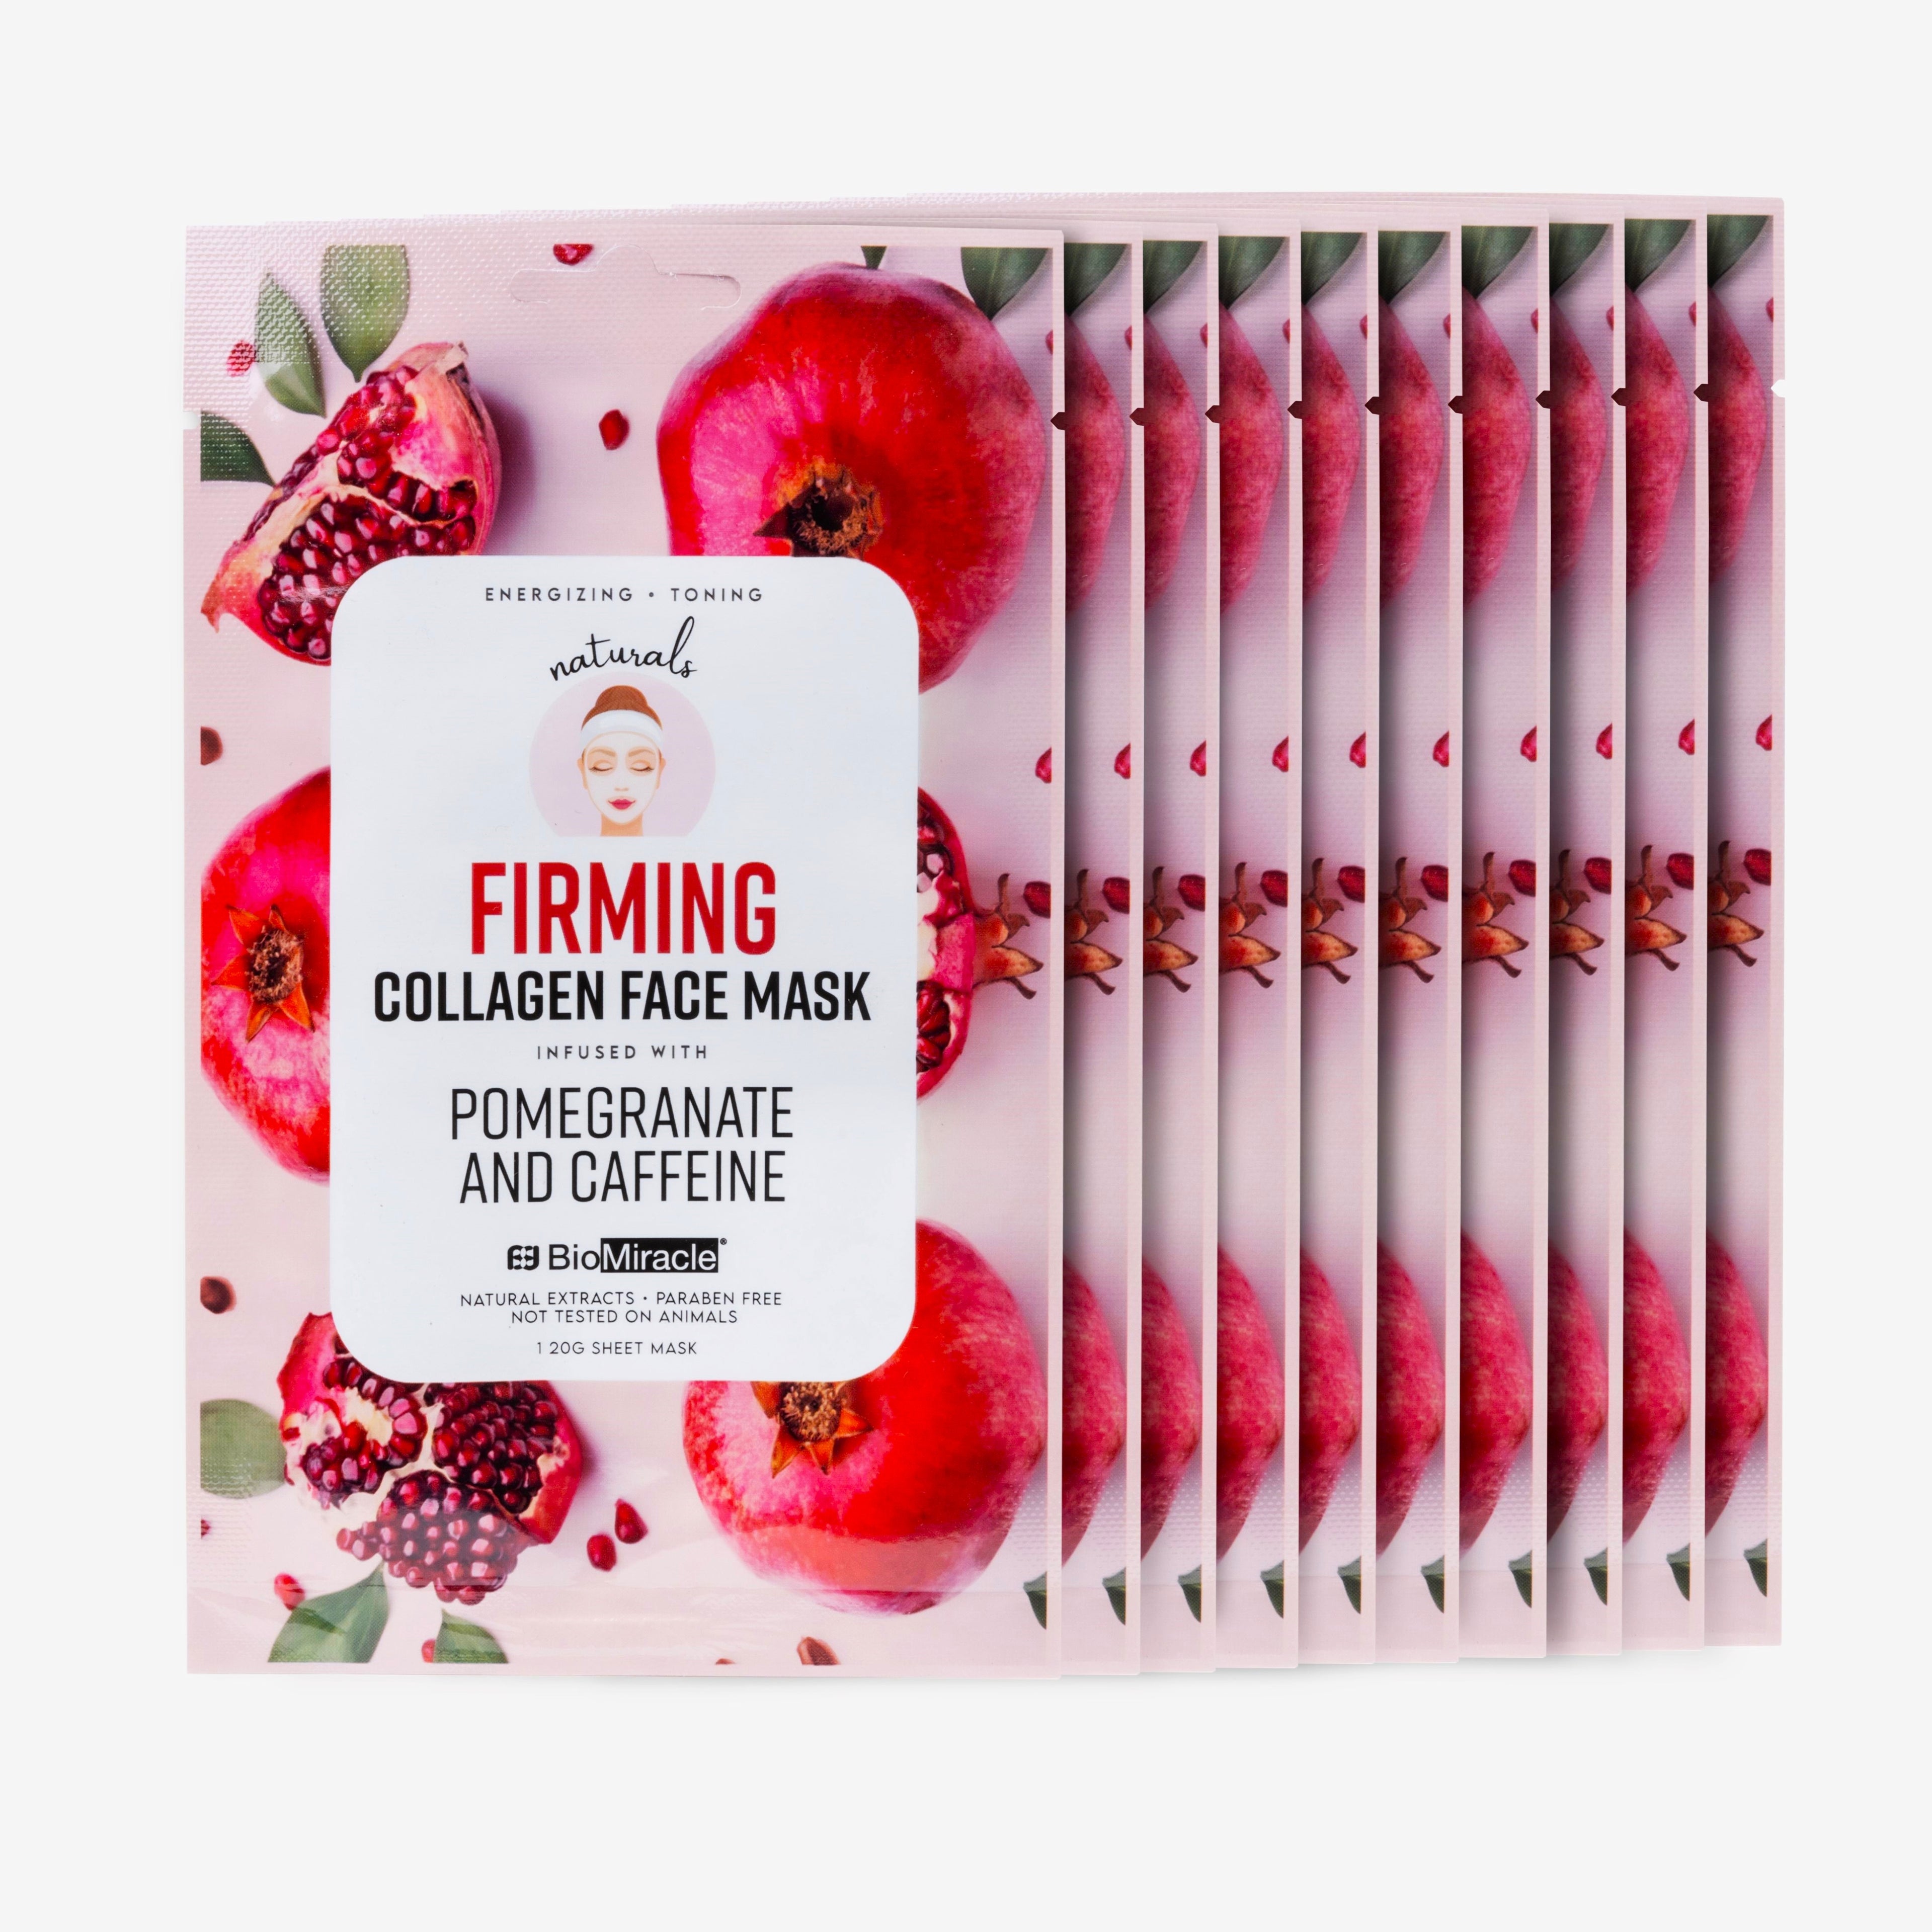 Firming Collagen Face Mask Infused with Pomegranate and Caffeine- 10 Pack